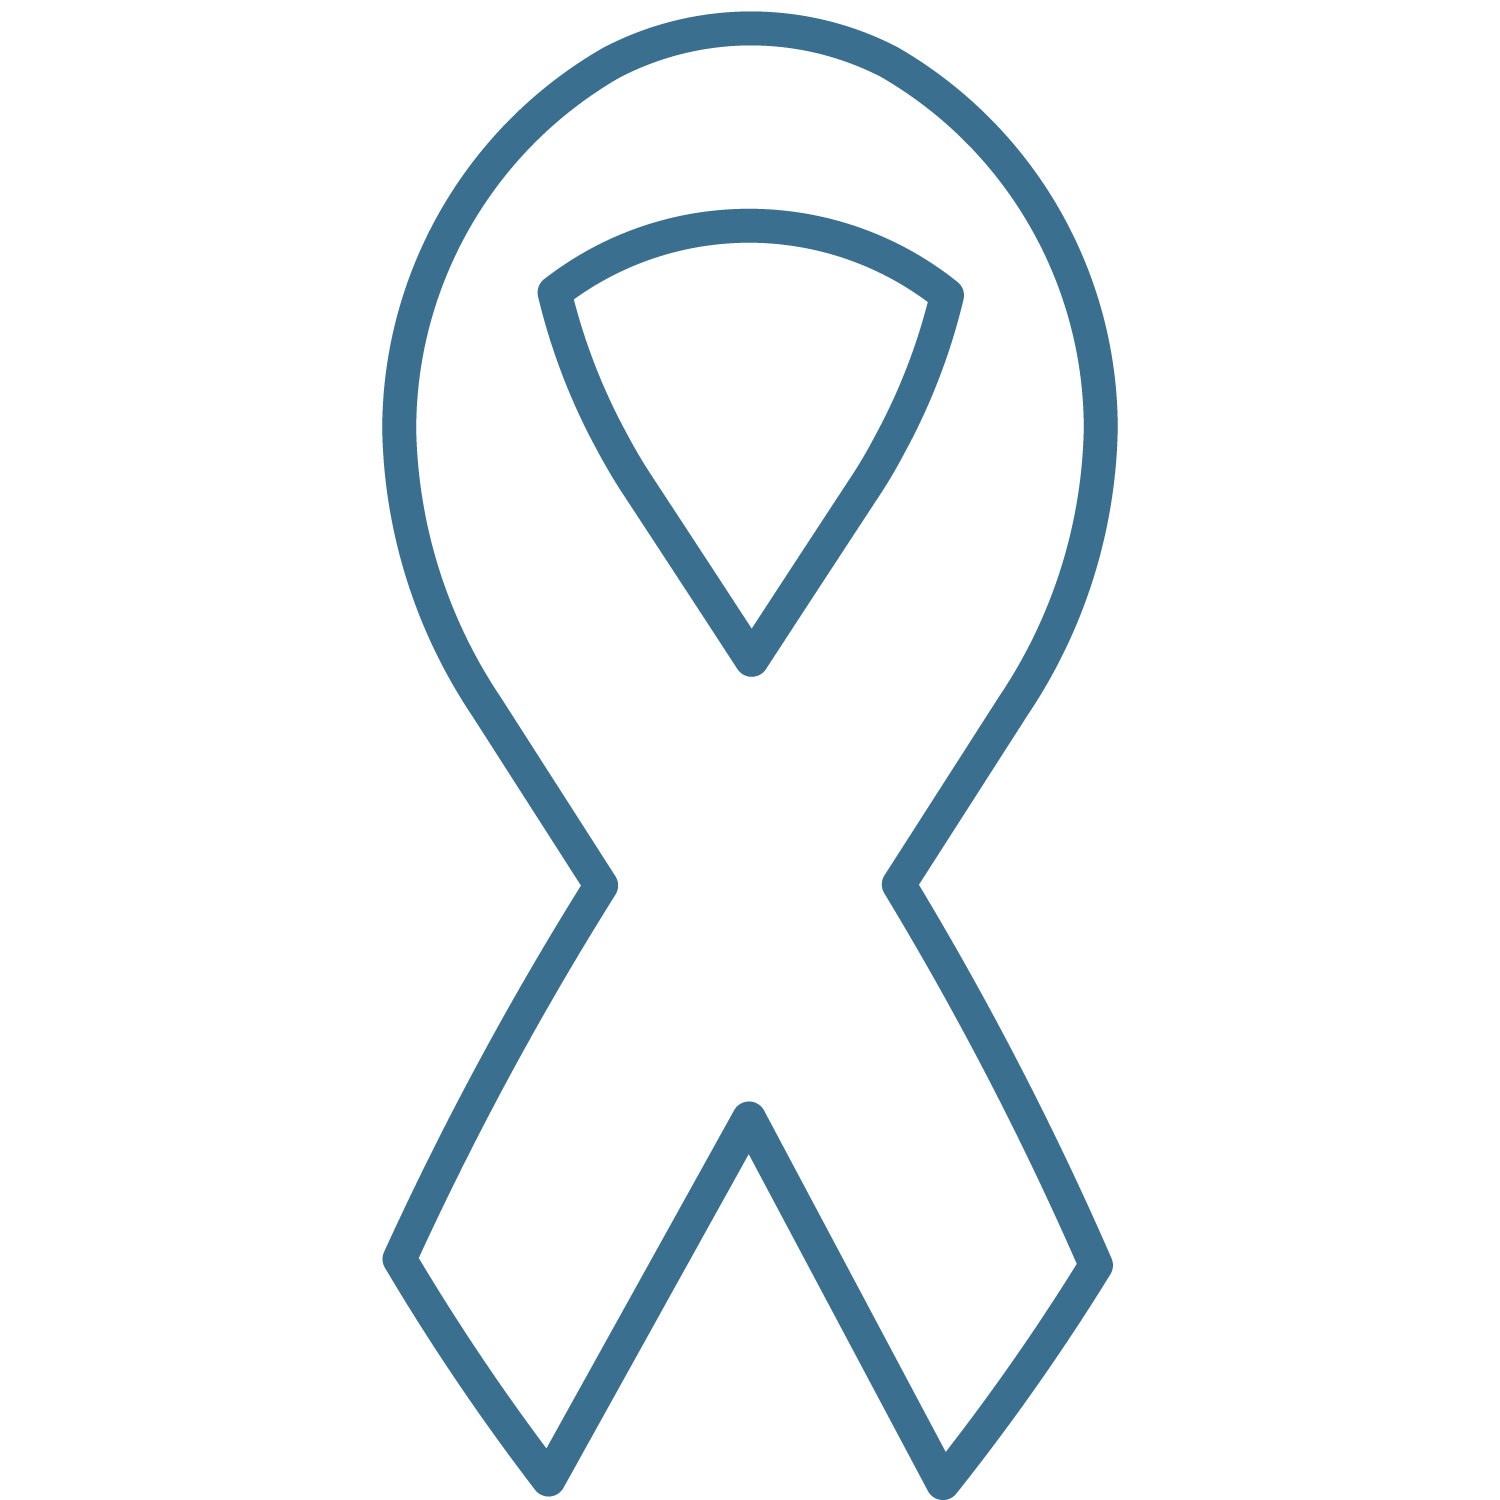 Breast Cancer Ribbon Outline Clipart Best